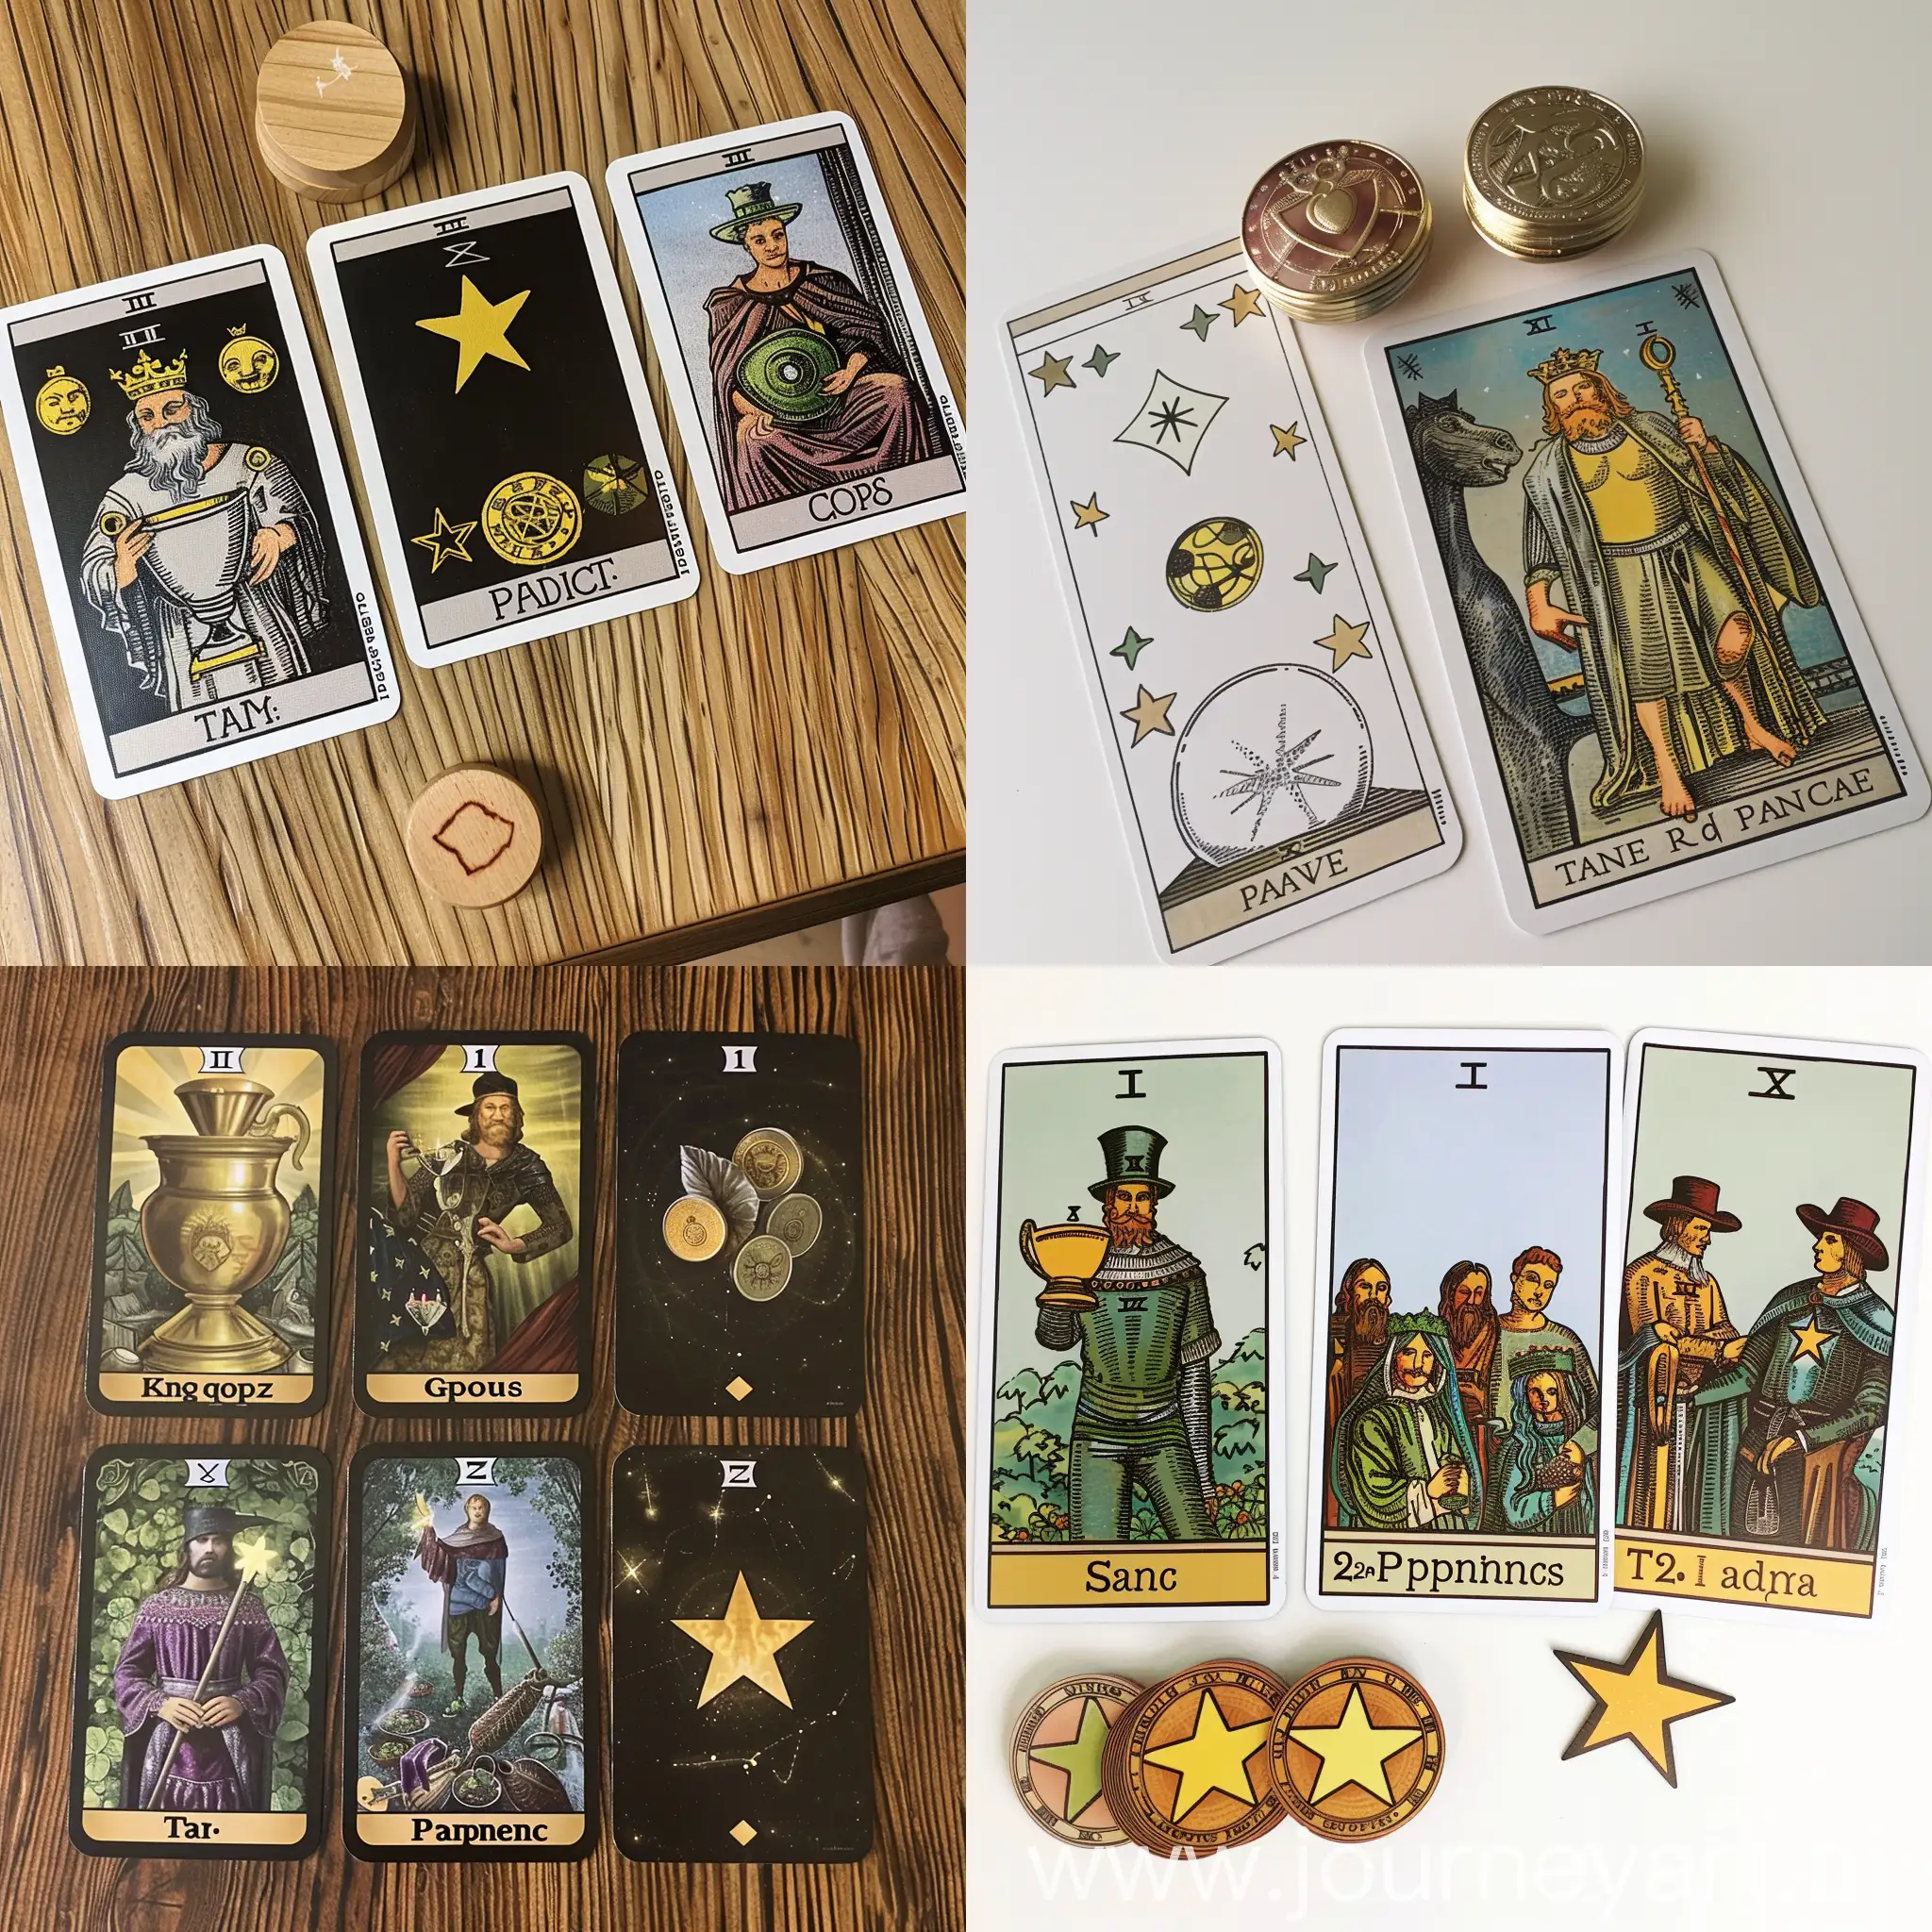 Tarot-Spread-King-of-Cups-Two-Pentacles-Star